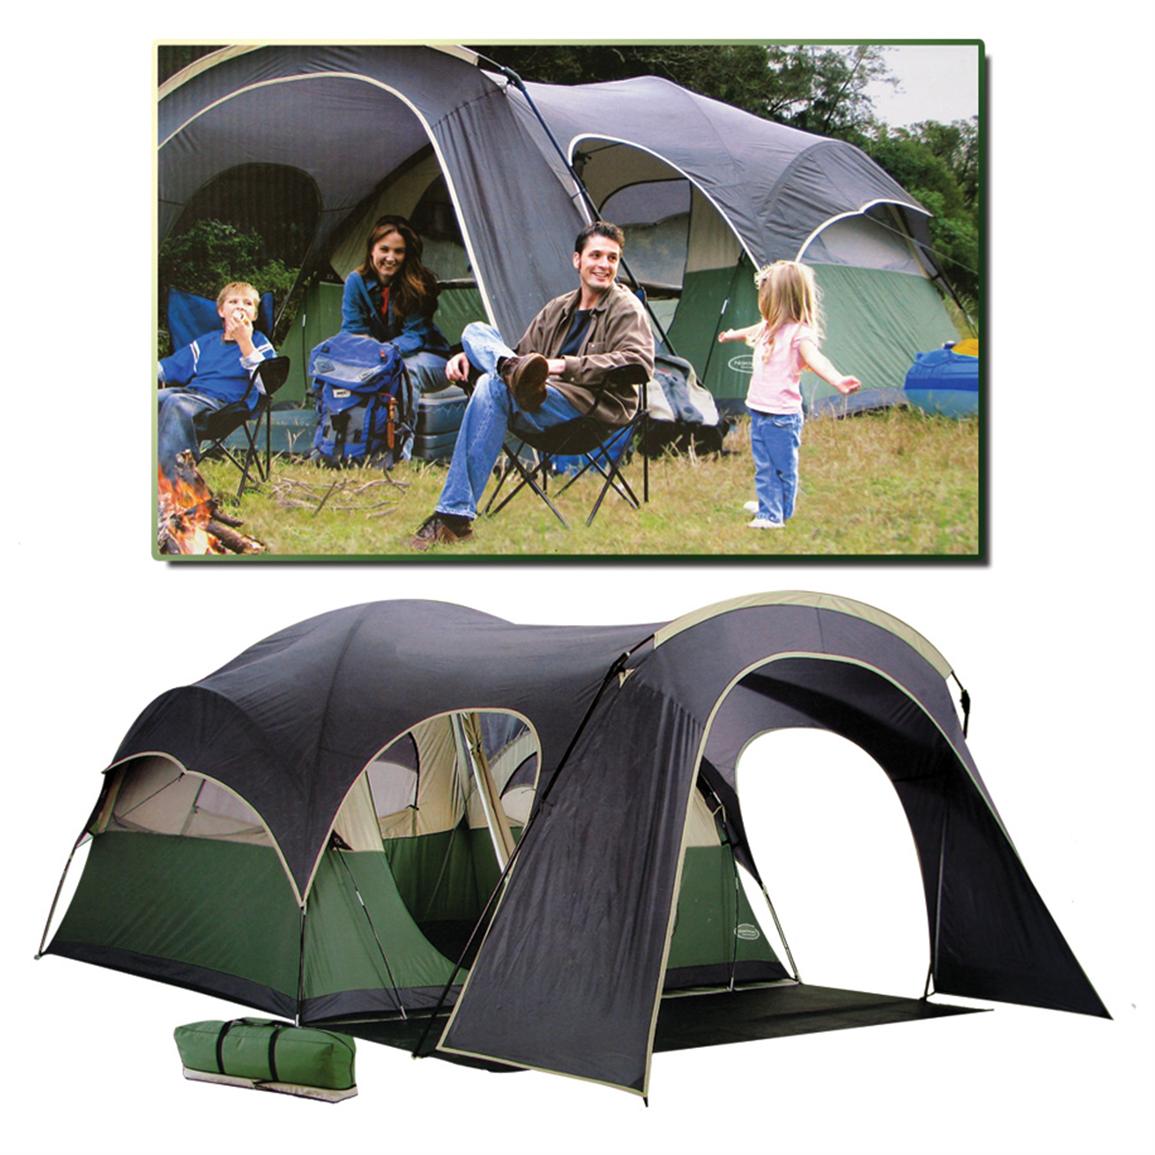 Trademark® Northpole 6 Person, 2 Room Dome Tent 164856, Dome Tents at Sportsman's Guide